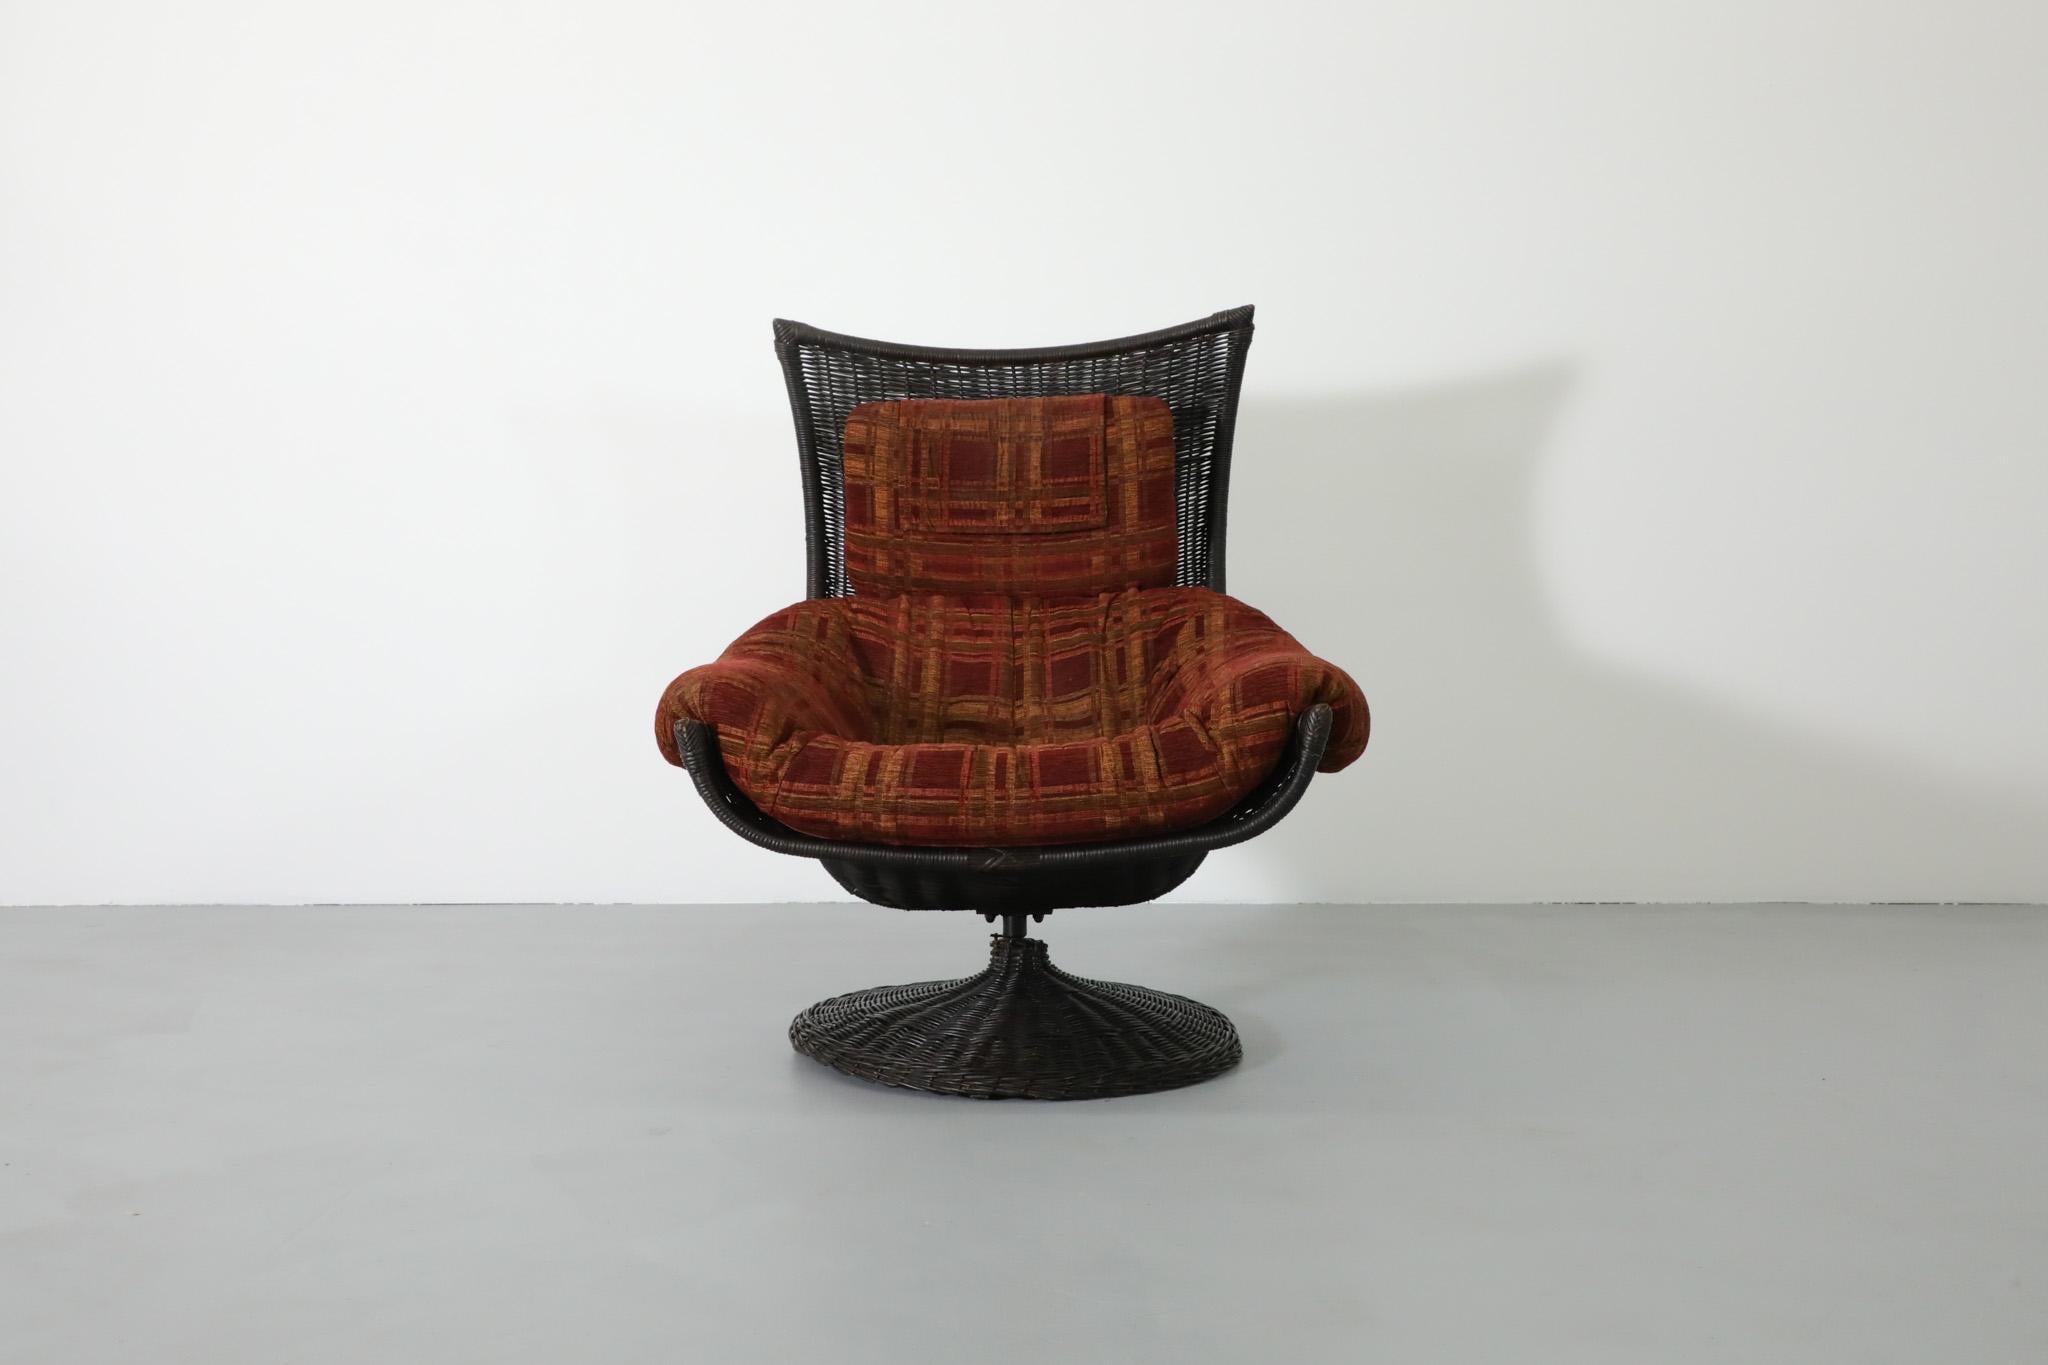 Impressive, Mid-Century Gerard van den Berg designed swivel lounge chair for the Dutch Montis company. Its black woven rattan seat sits on a sturdy metal frame with an attractively patterned red fabric cushion and headrest. This beautiful lounge